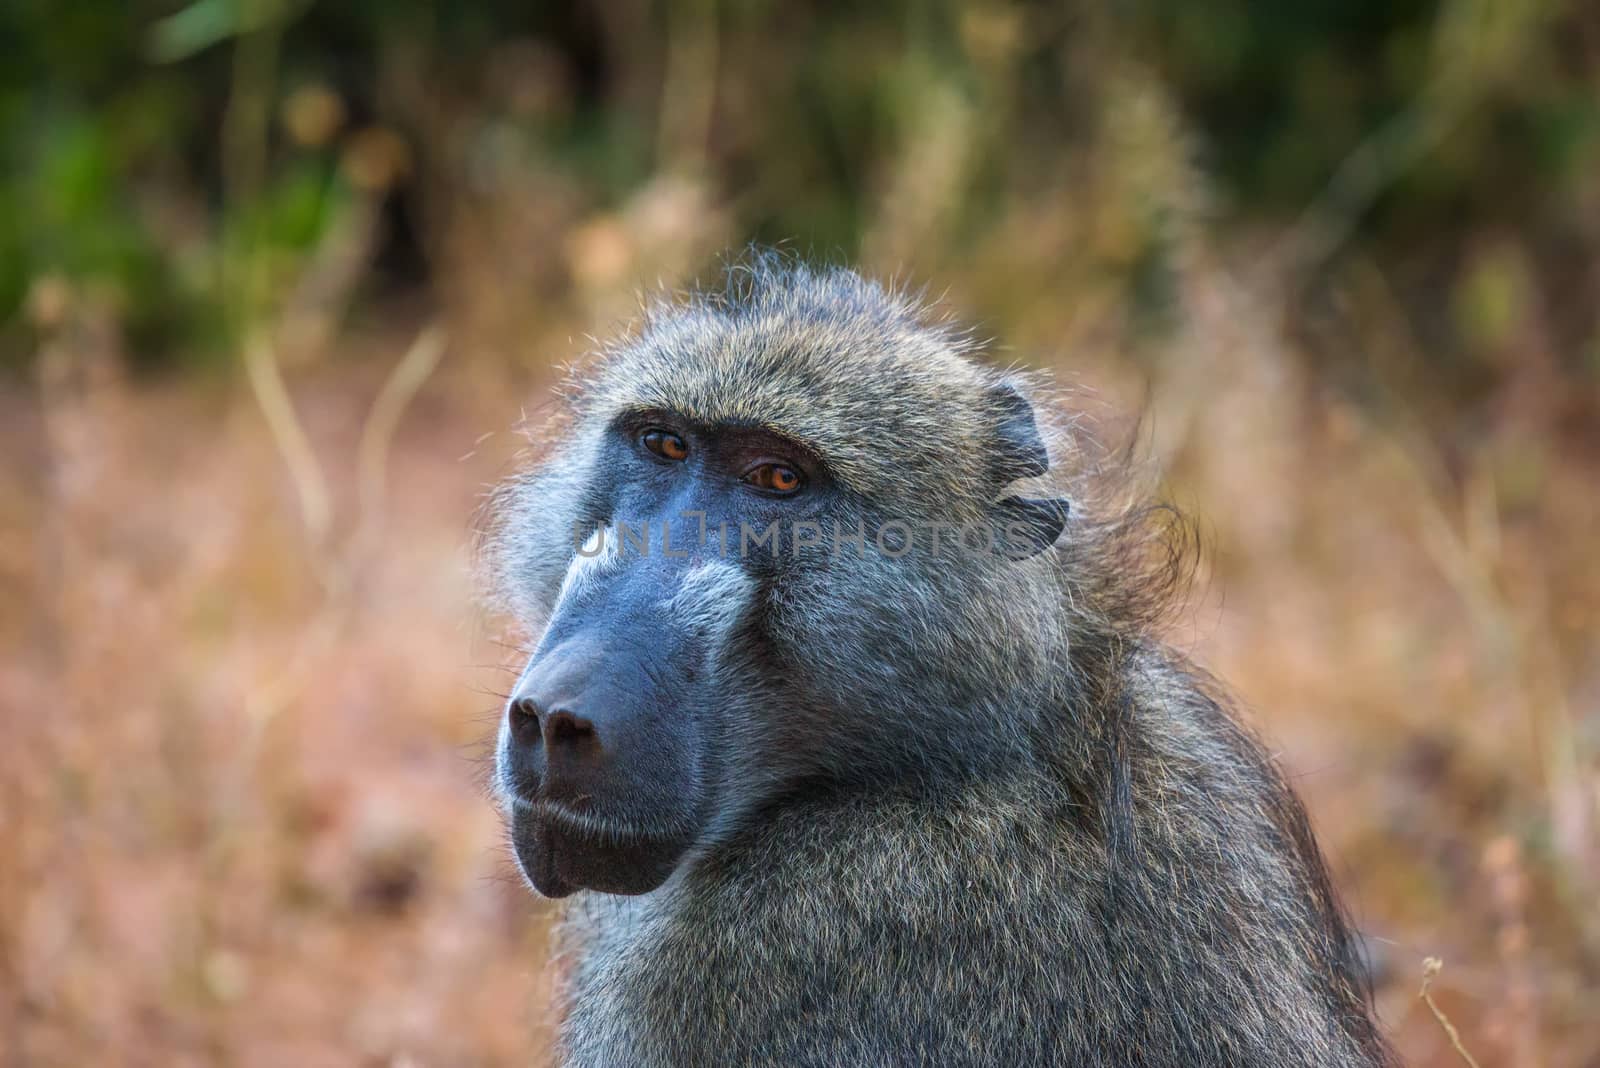 Portrait of a Chacma baboon monkey in the Chobe National Park, Botswana by nickfox